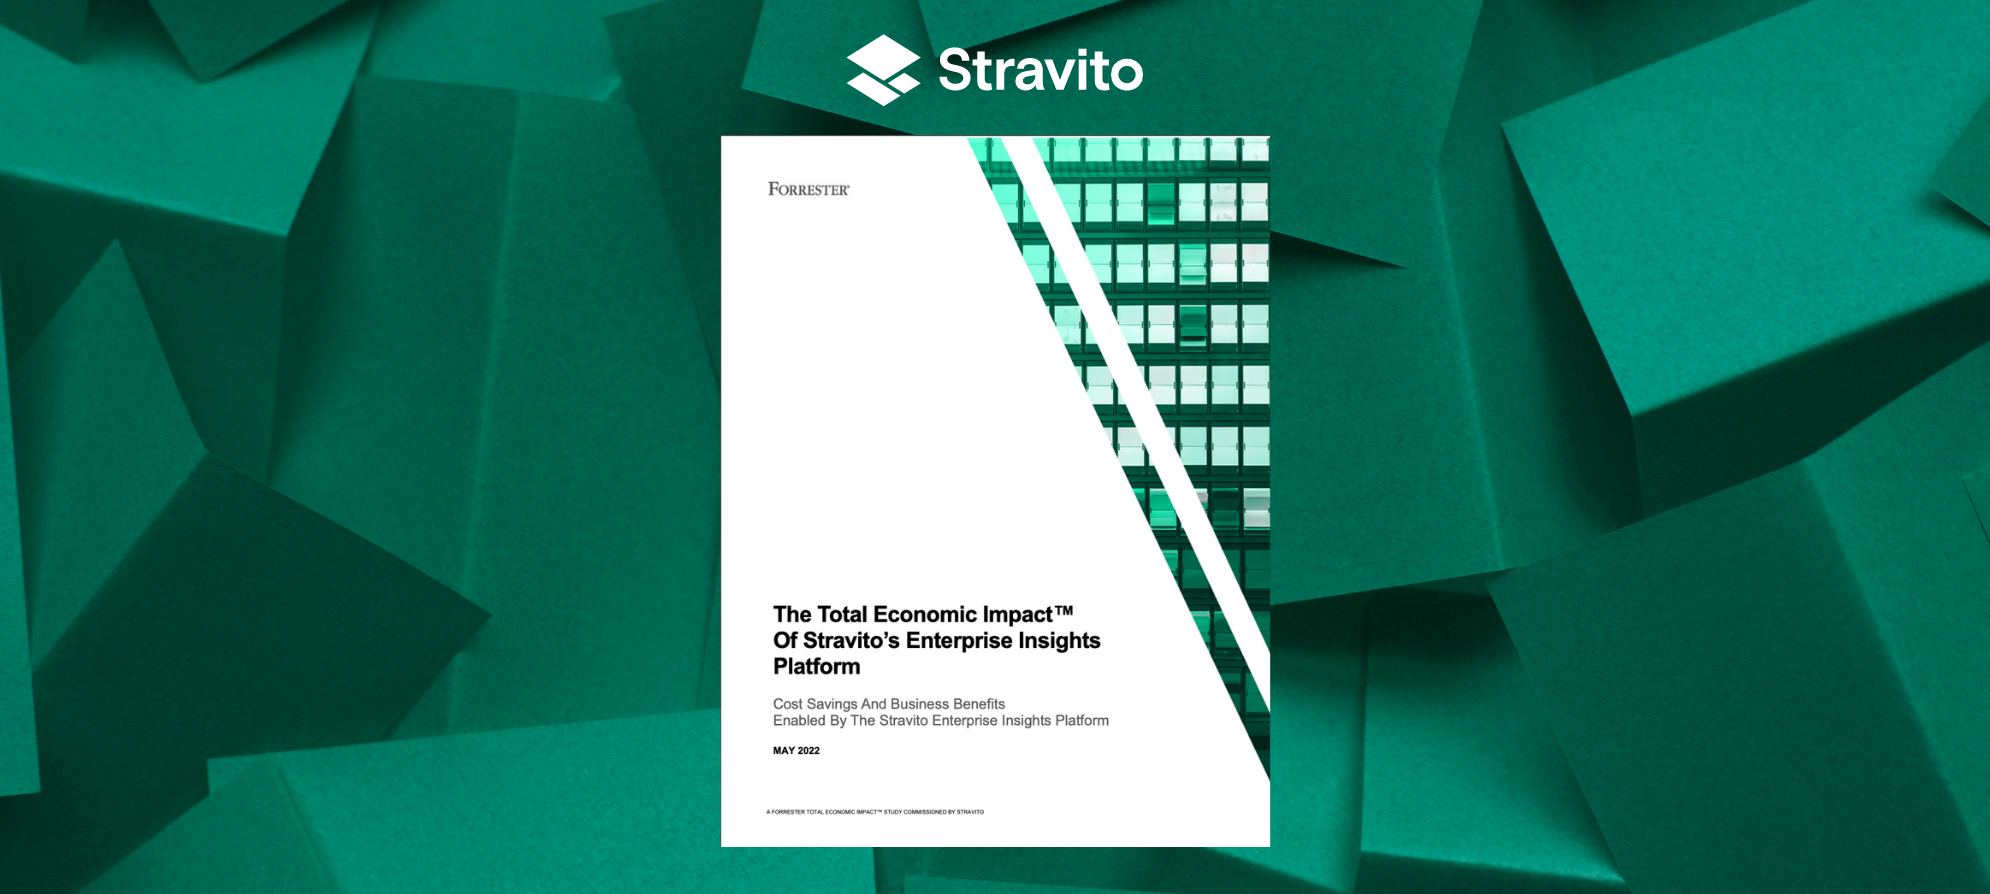 Stravito named in Forrester's Now Tech: Market & Competitive Intelligence Platforms, Q1 2022 report